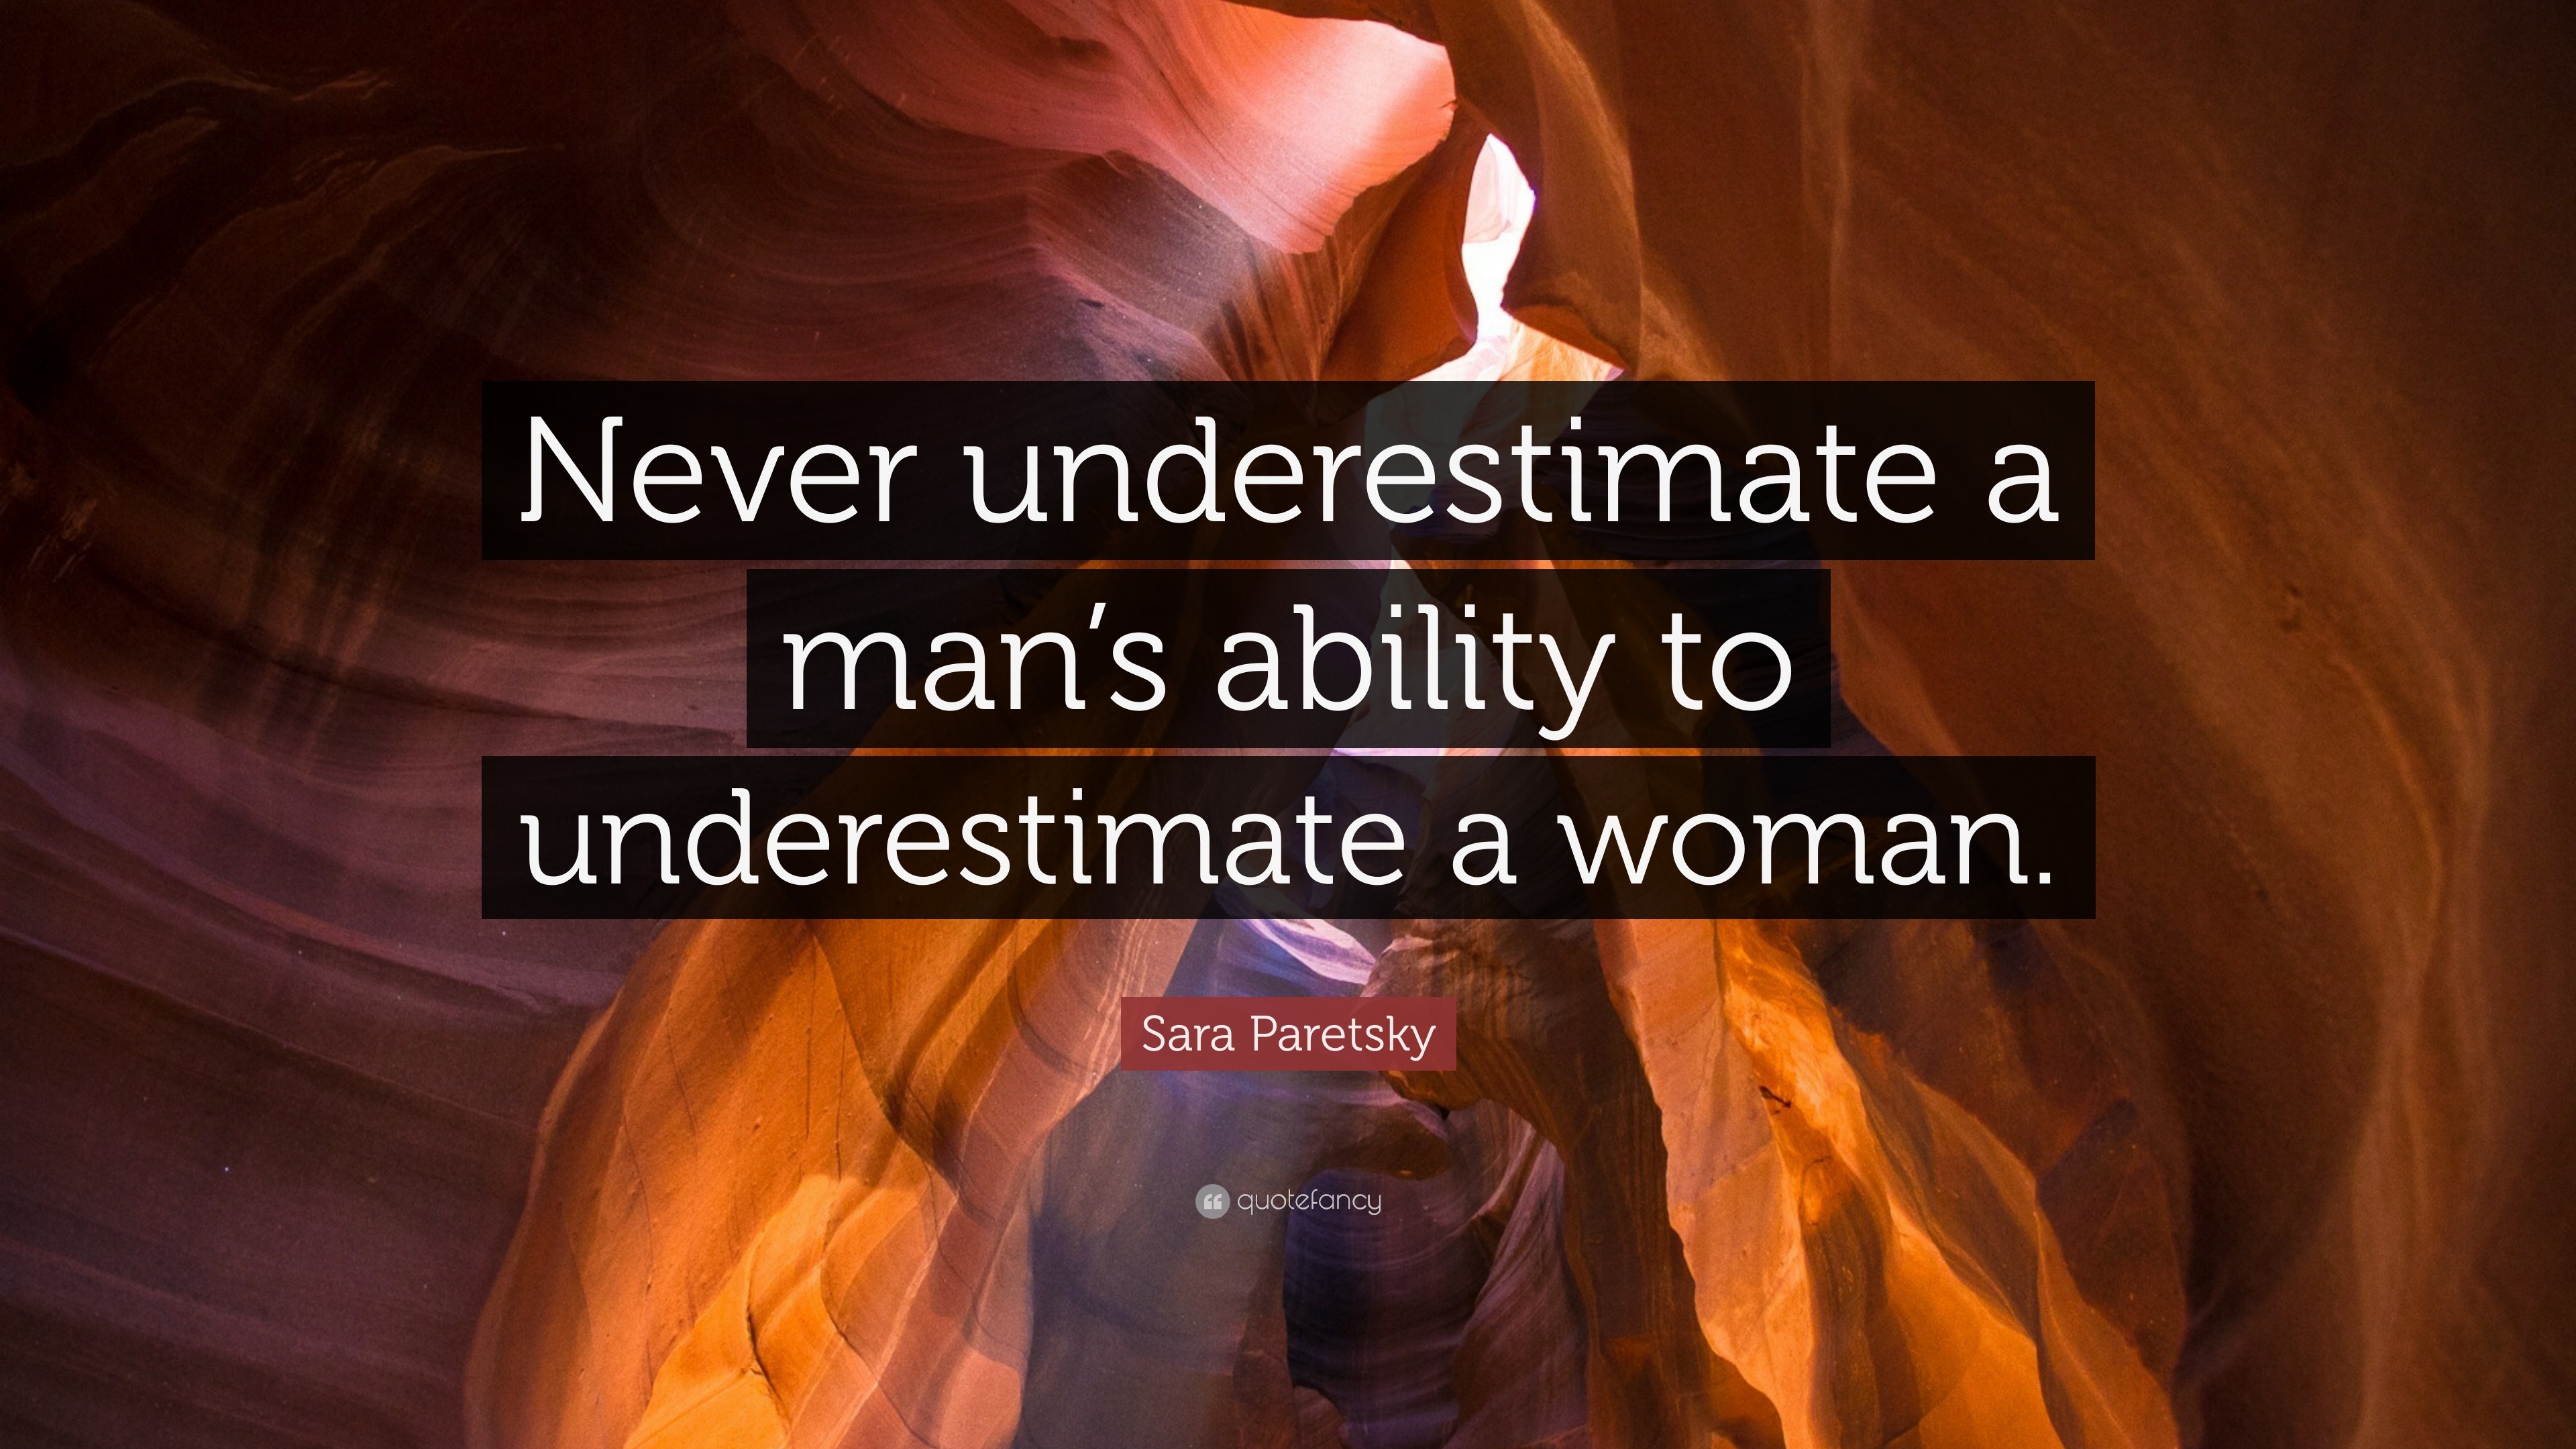 Sara Paretsky Quote: “Never underestimate a man's ability to